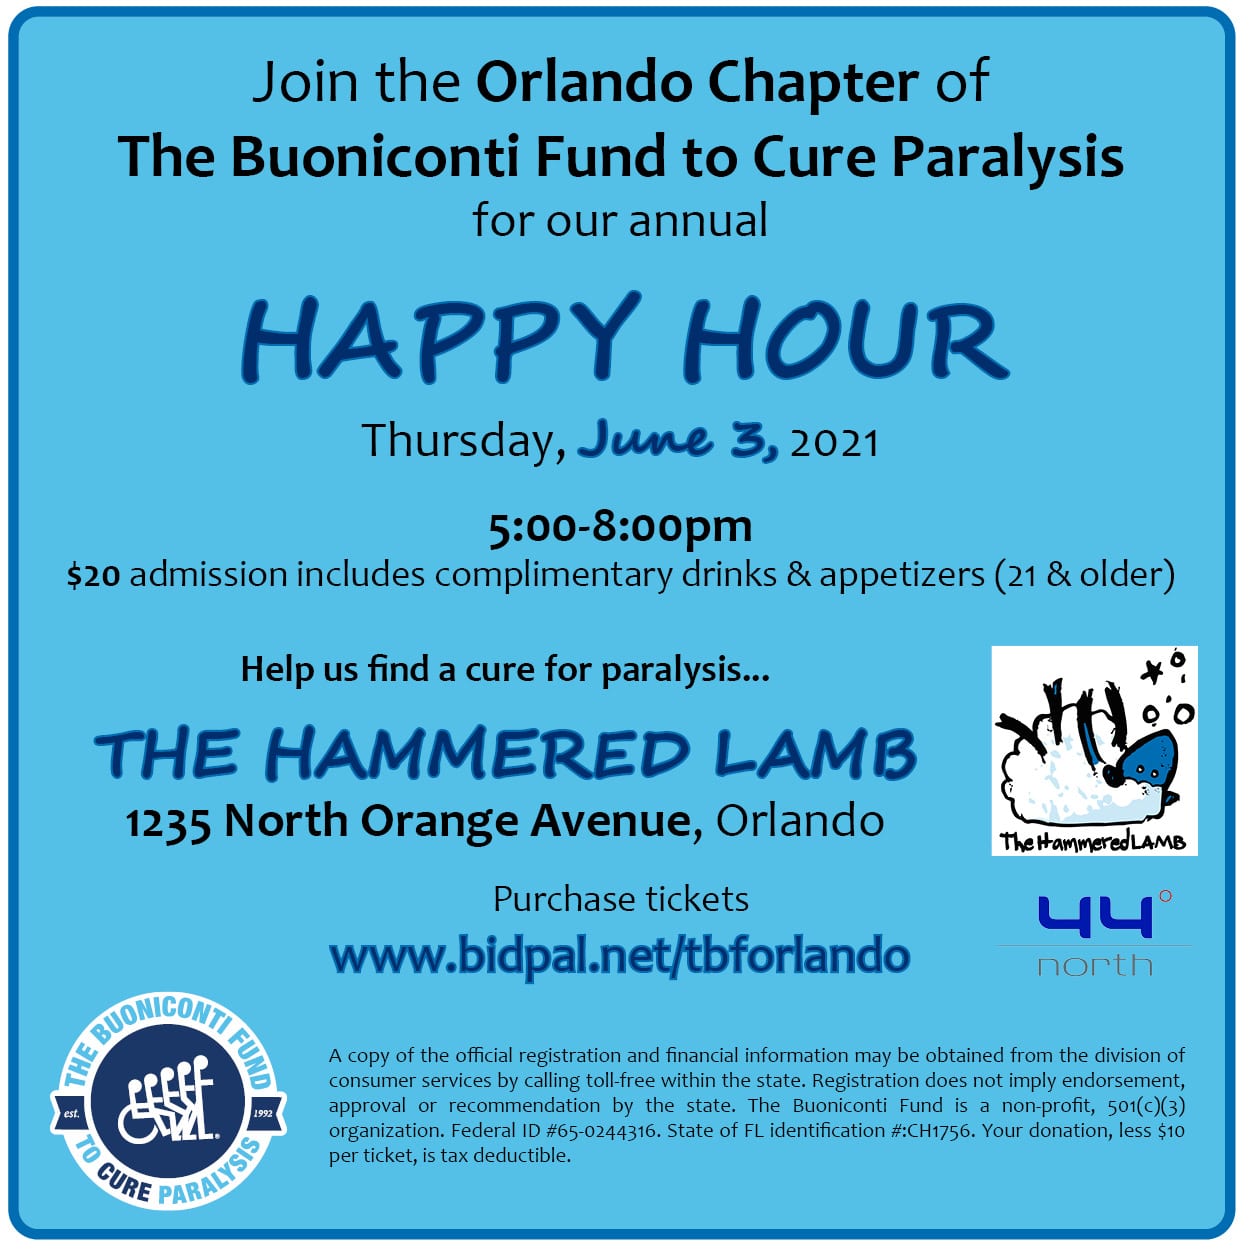 Happy Hour at The Hammered Lamb